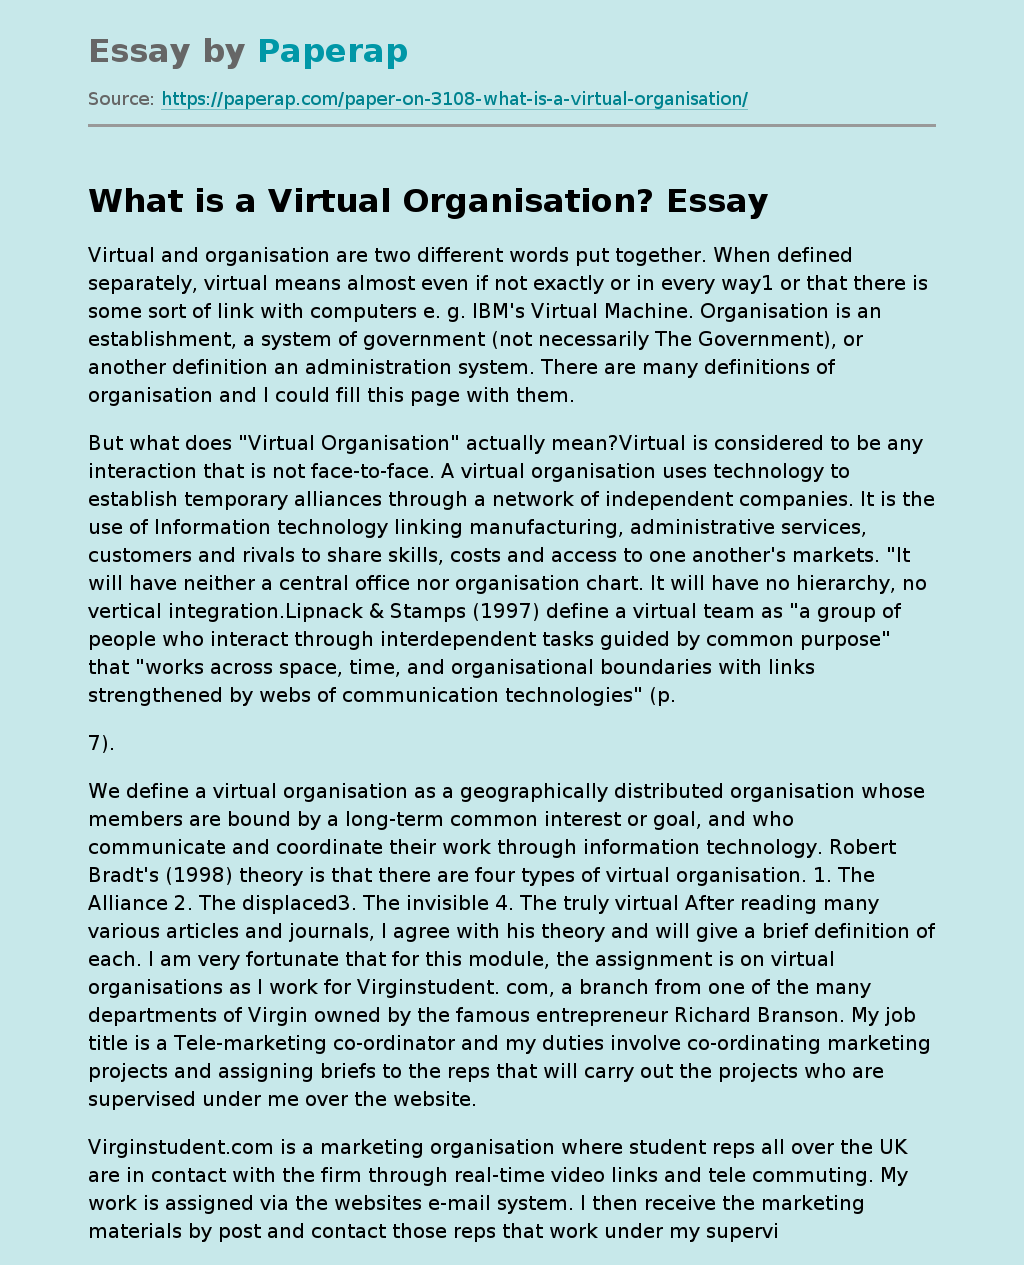 What is a Virtual Organisation?